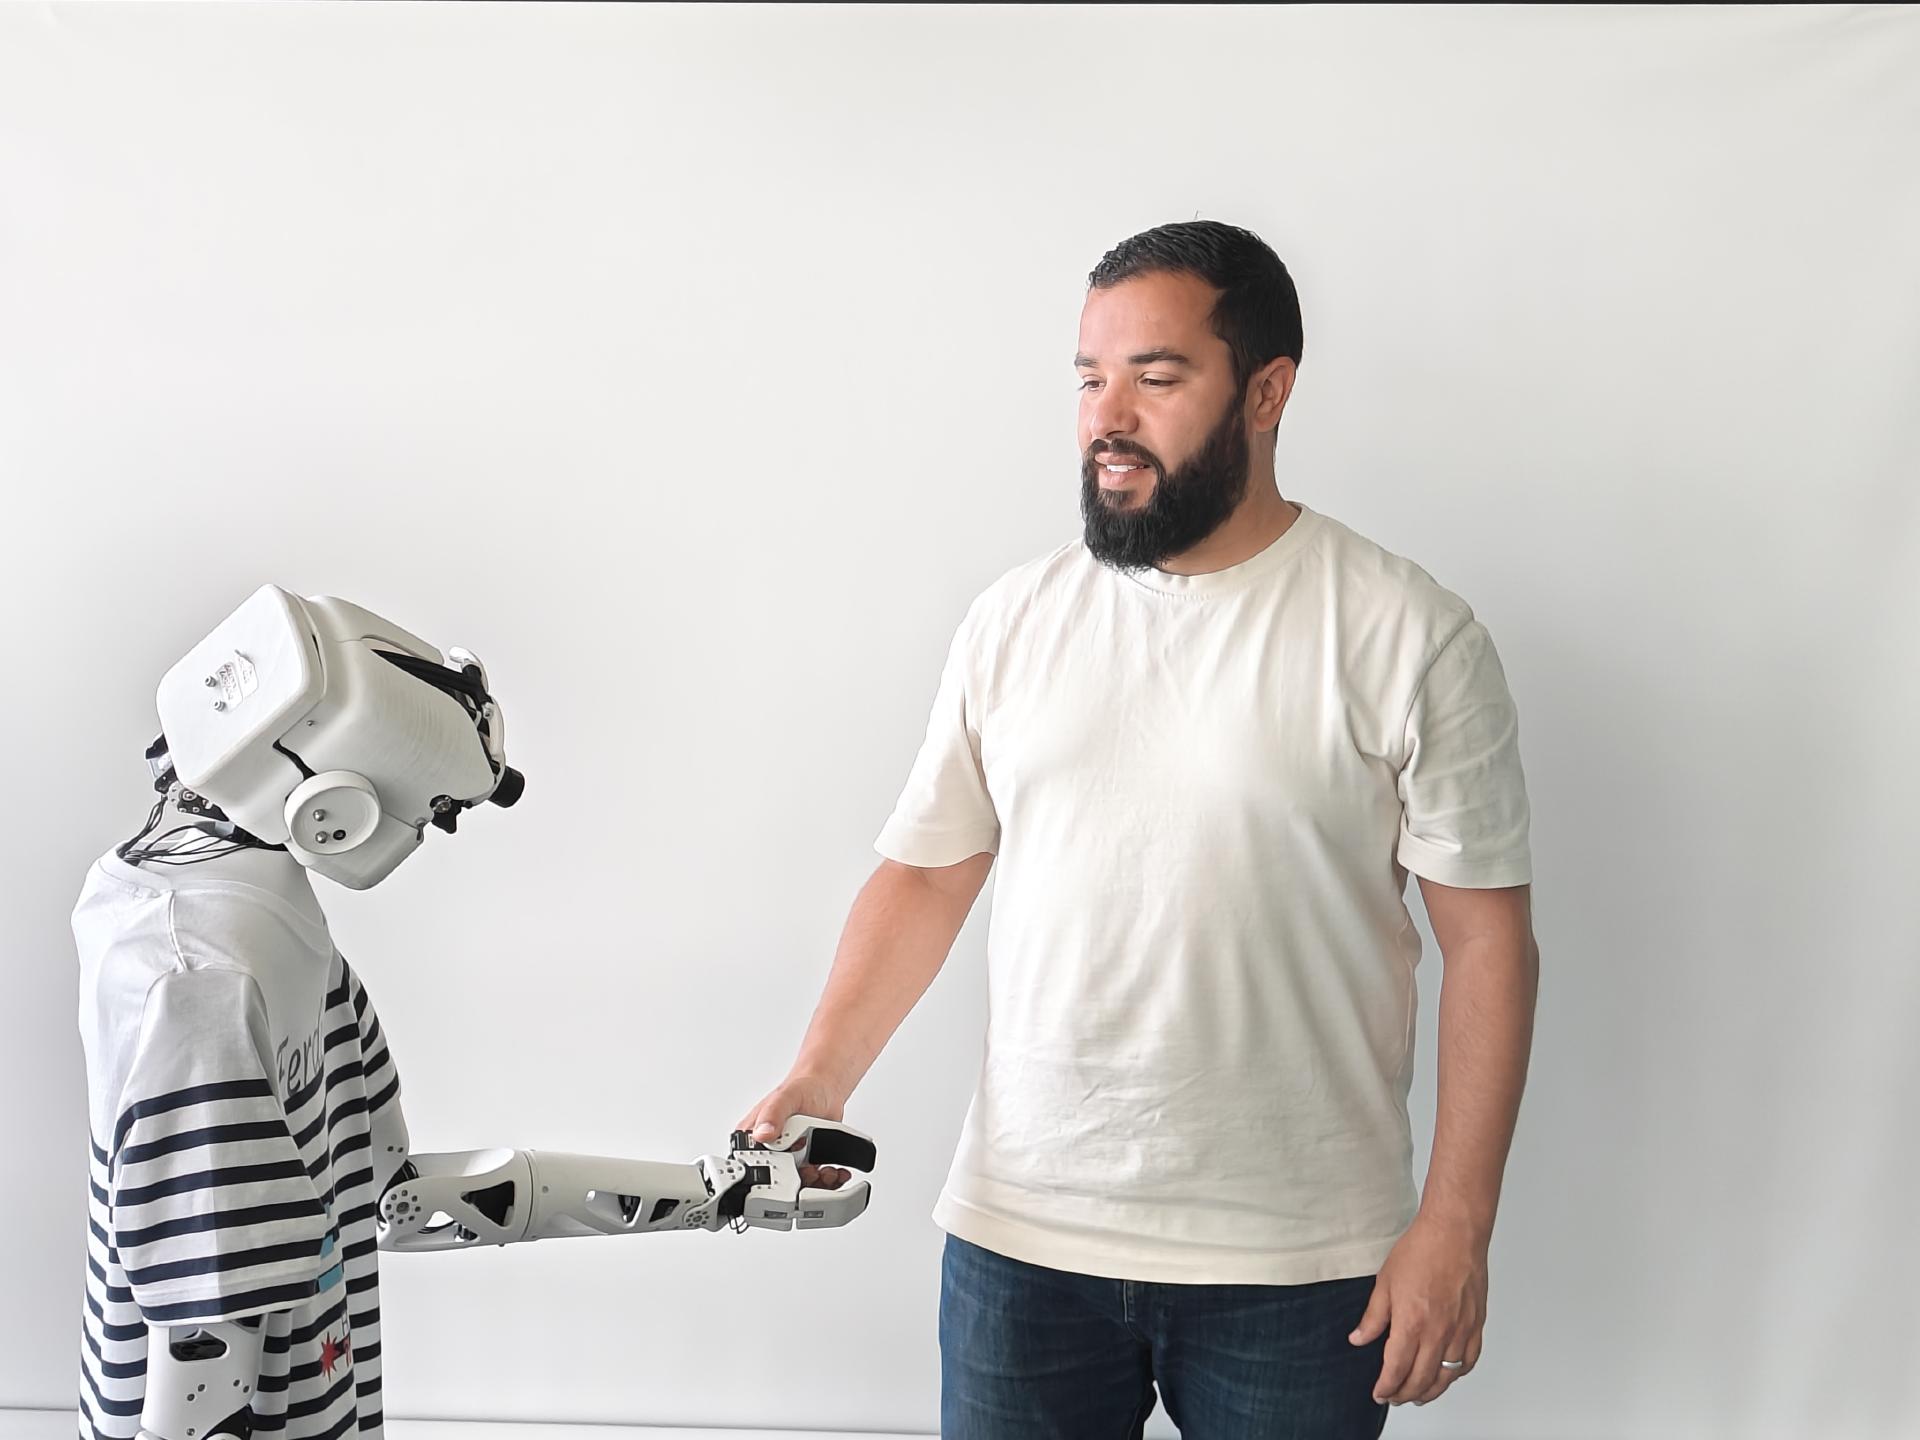 Human-robot interactions help better understand language learning 